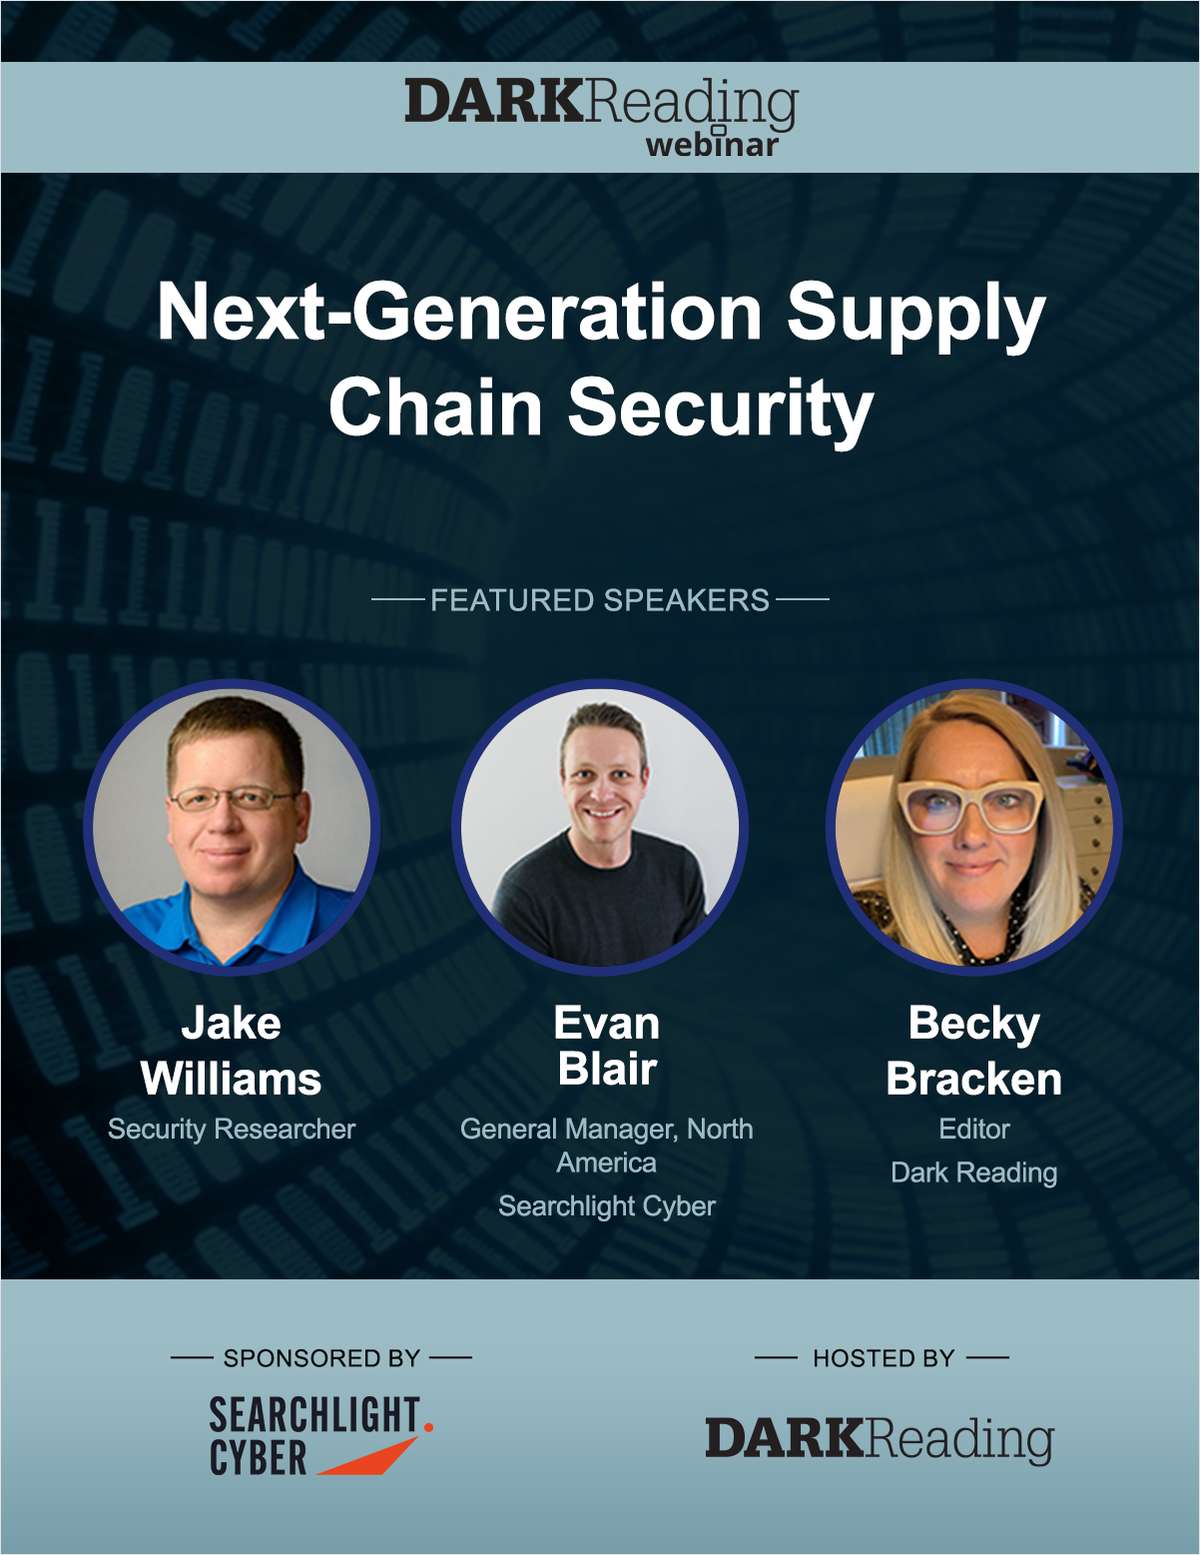 Next-Generation Supply Chain Security